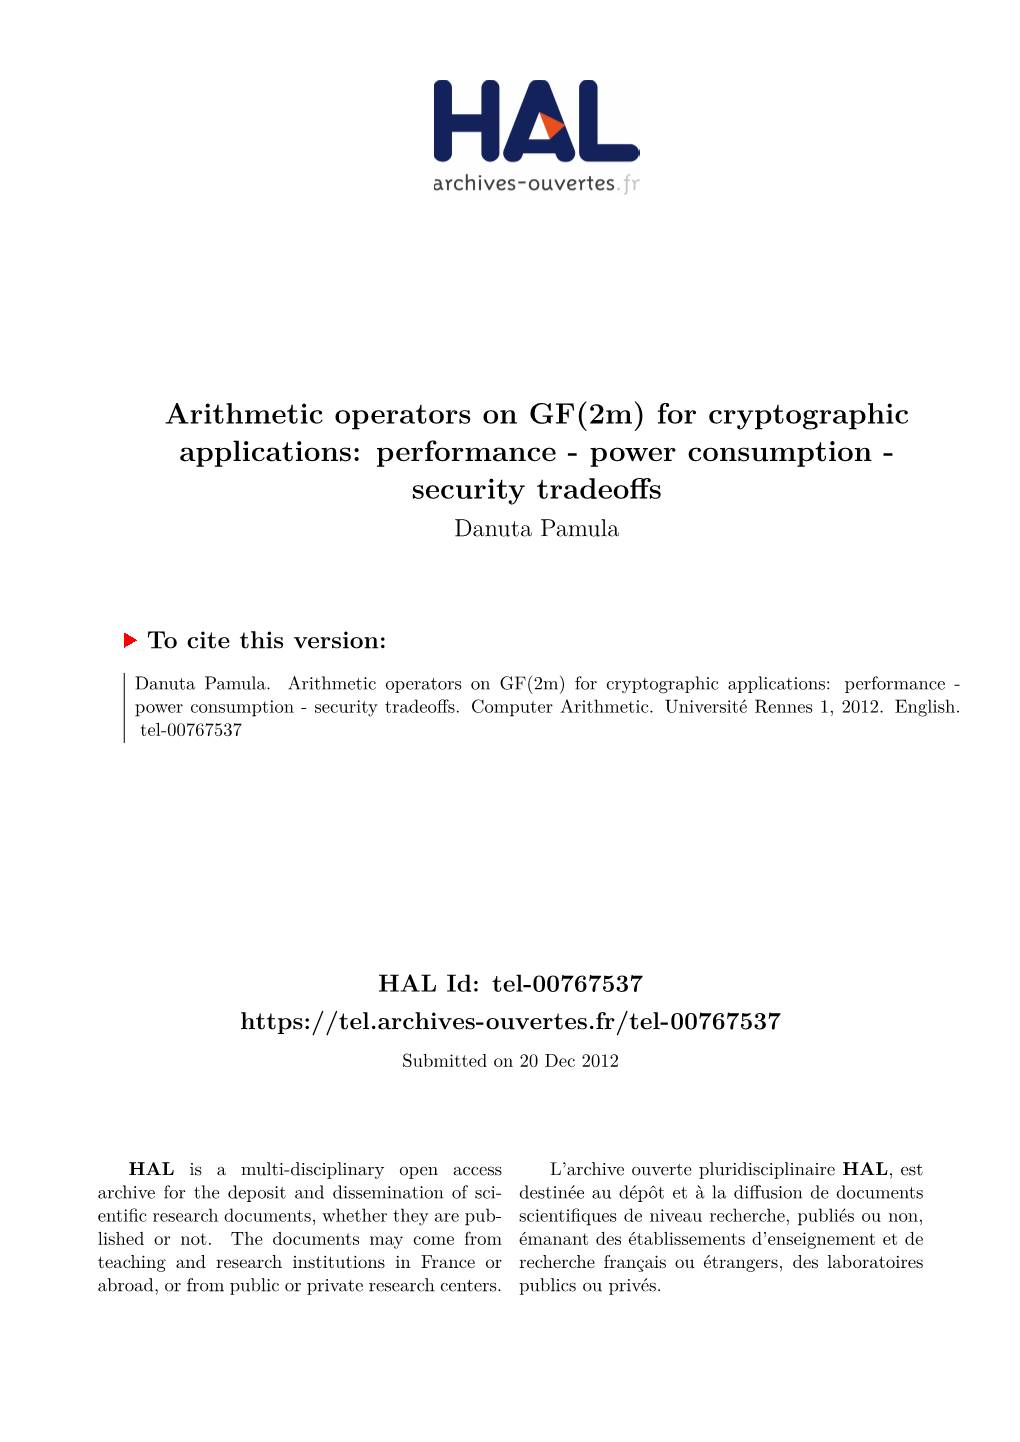 Arithmetic Operators on GF(2M) for Cryptographic Applications: Performance - Power Consumption - Security Tradeoffs Danuta Pamula